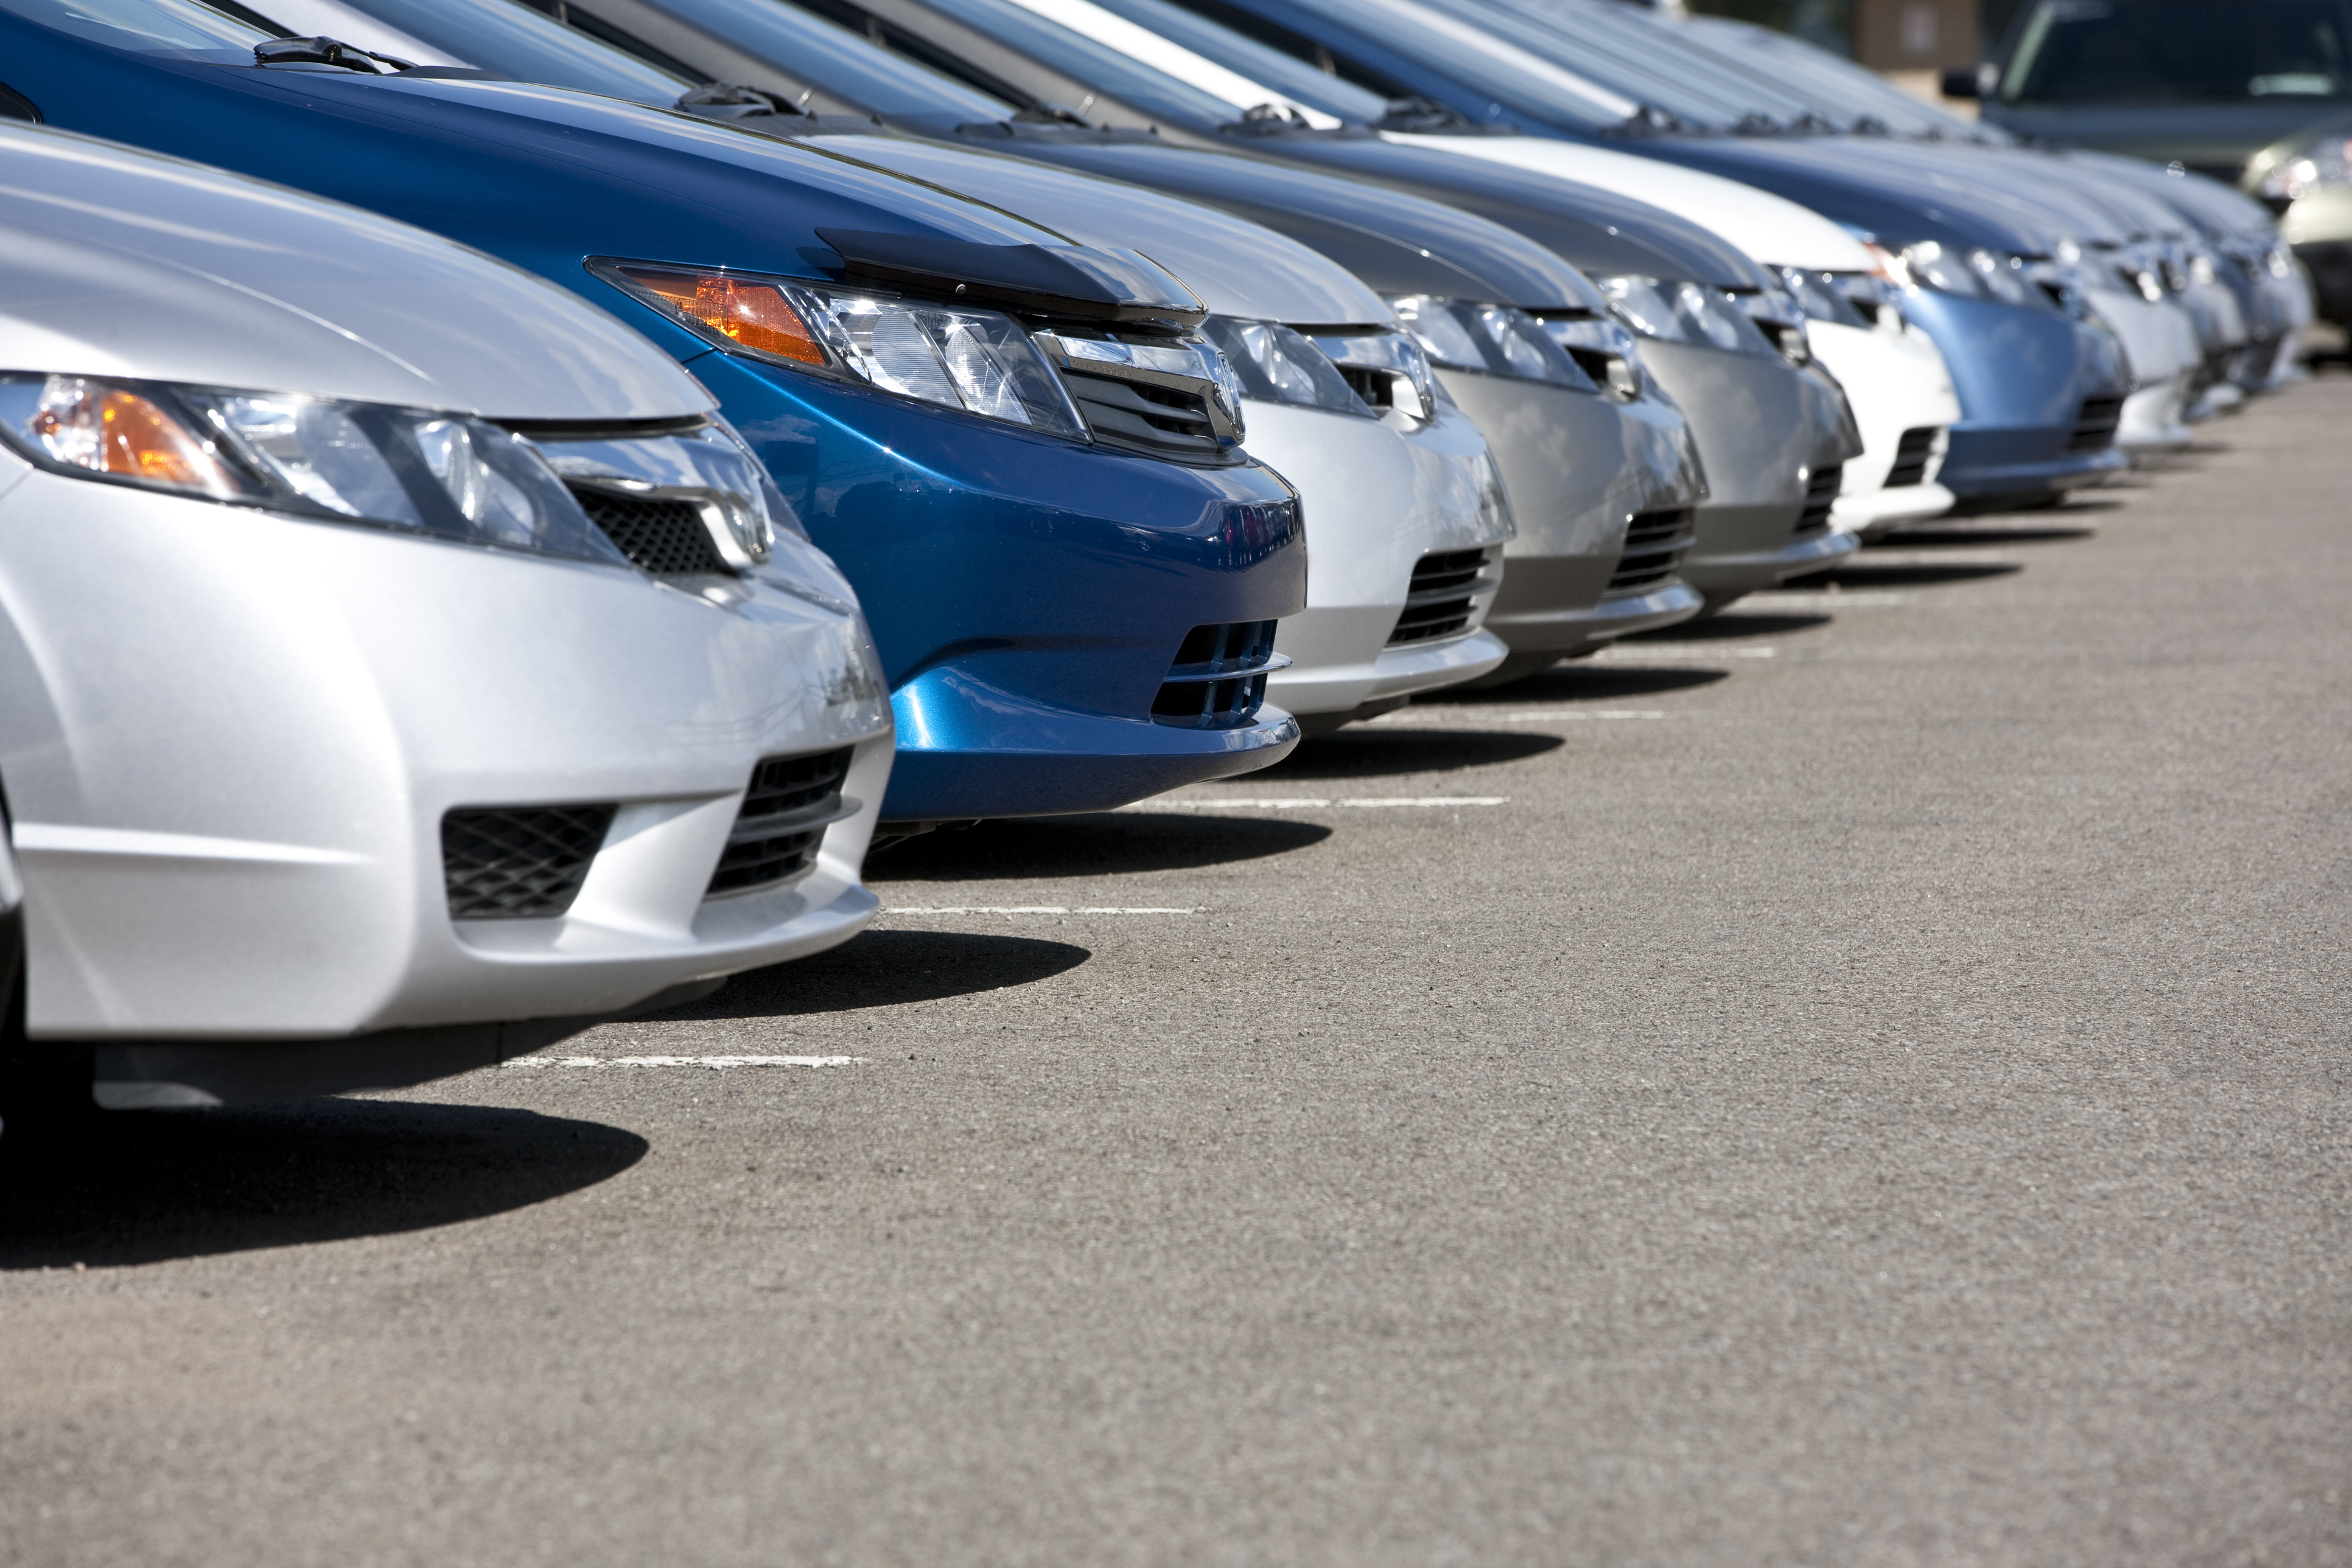 How to Be Taken Seriously at a Dealership and Negotiate a Great Deal